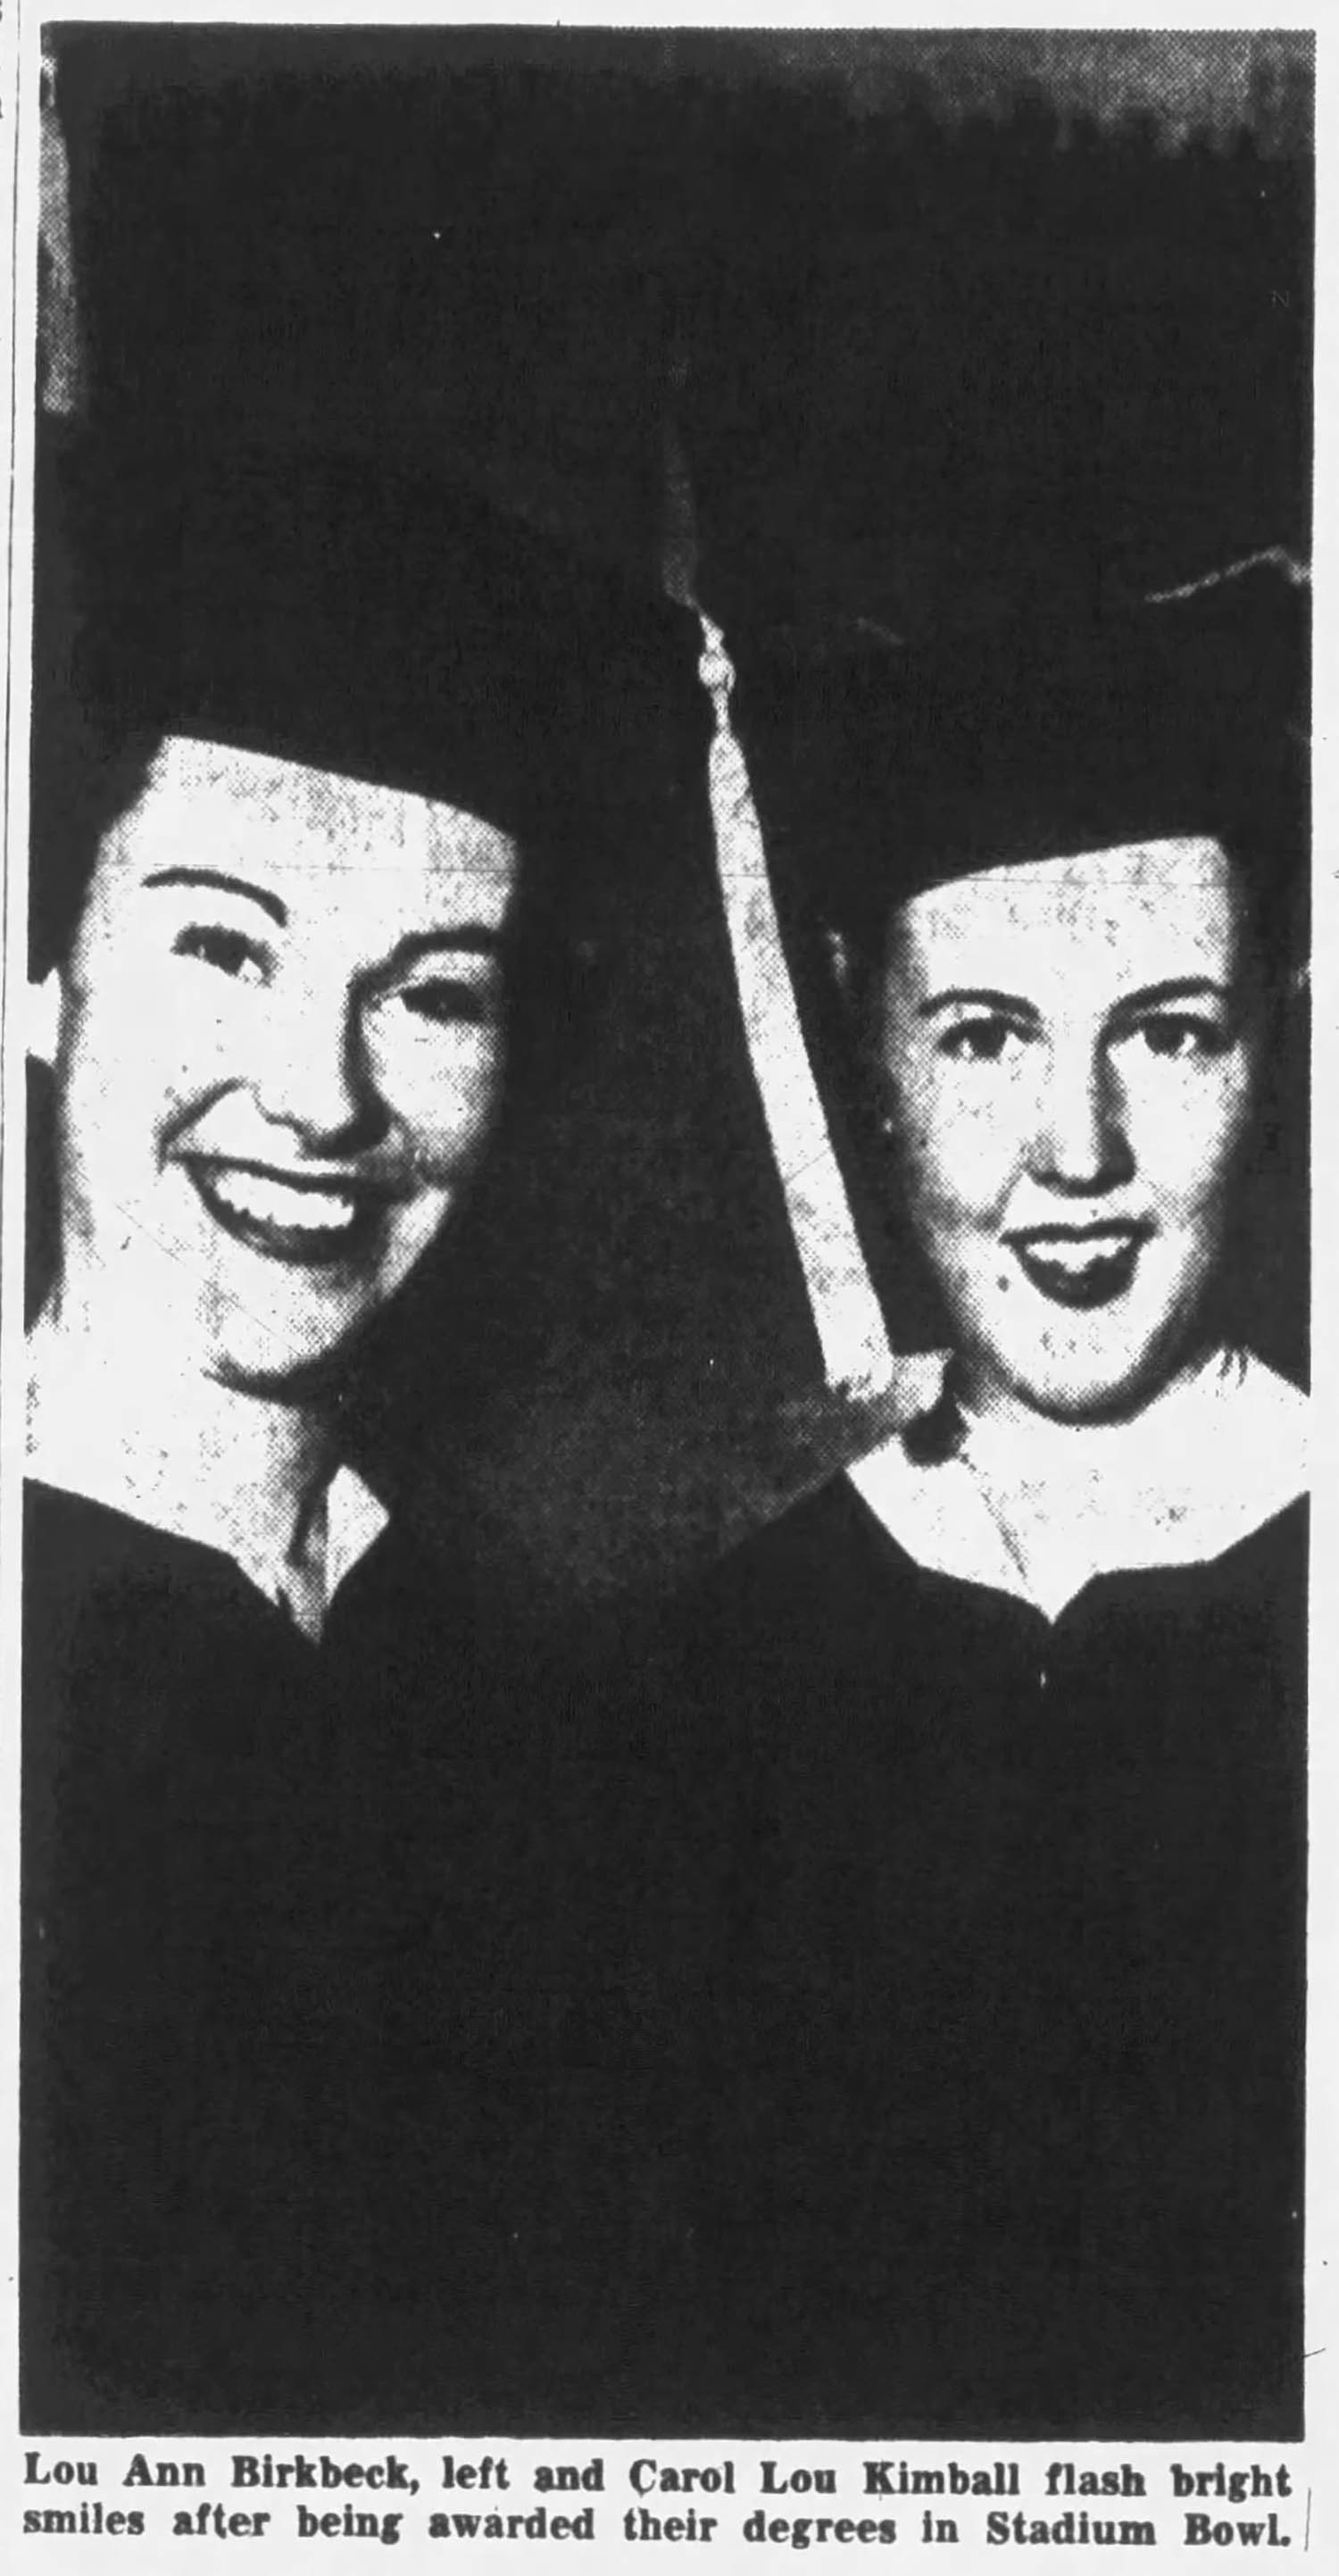 Photo of Lou Ann Birkbeck and Carol Lou Kimball wearing graduation regalia at the University of Utah Commencement Ceremony